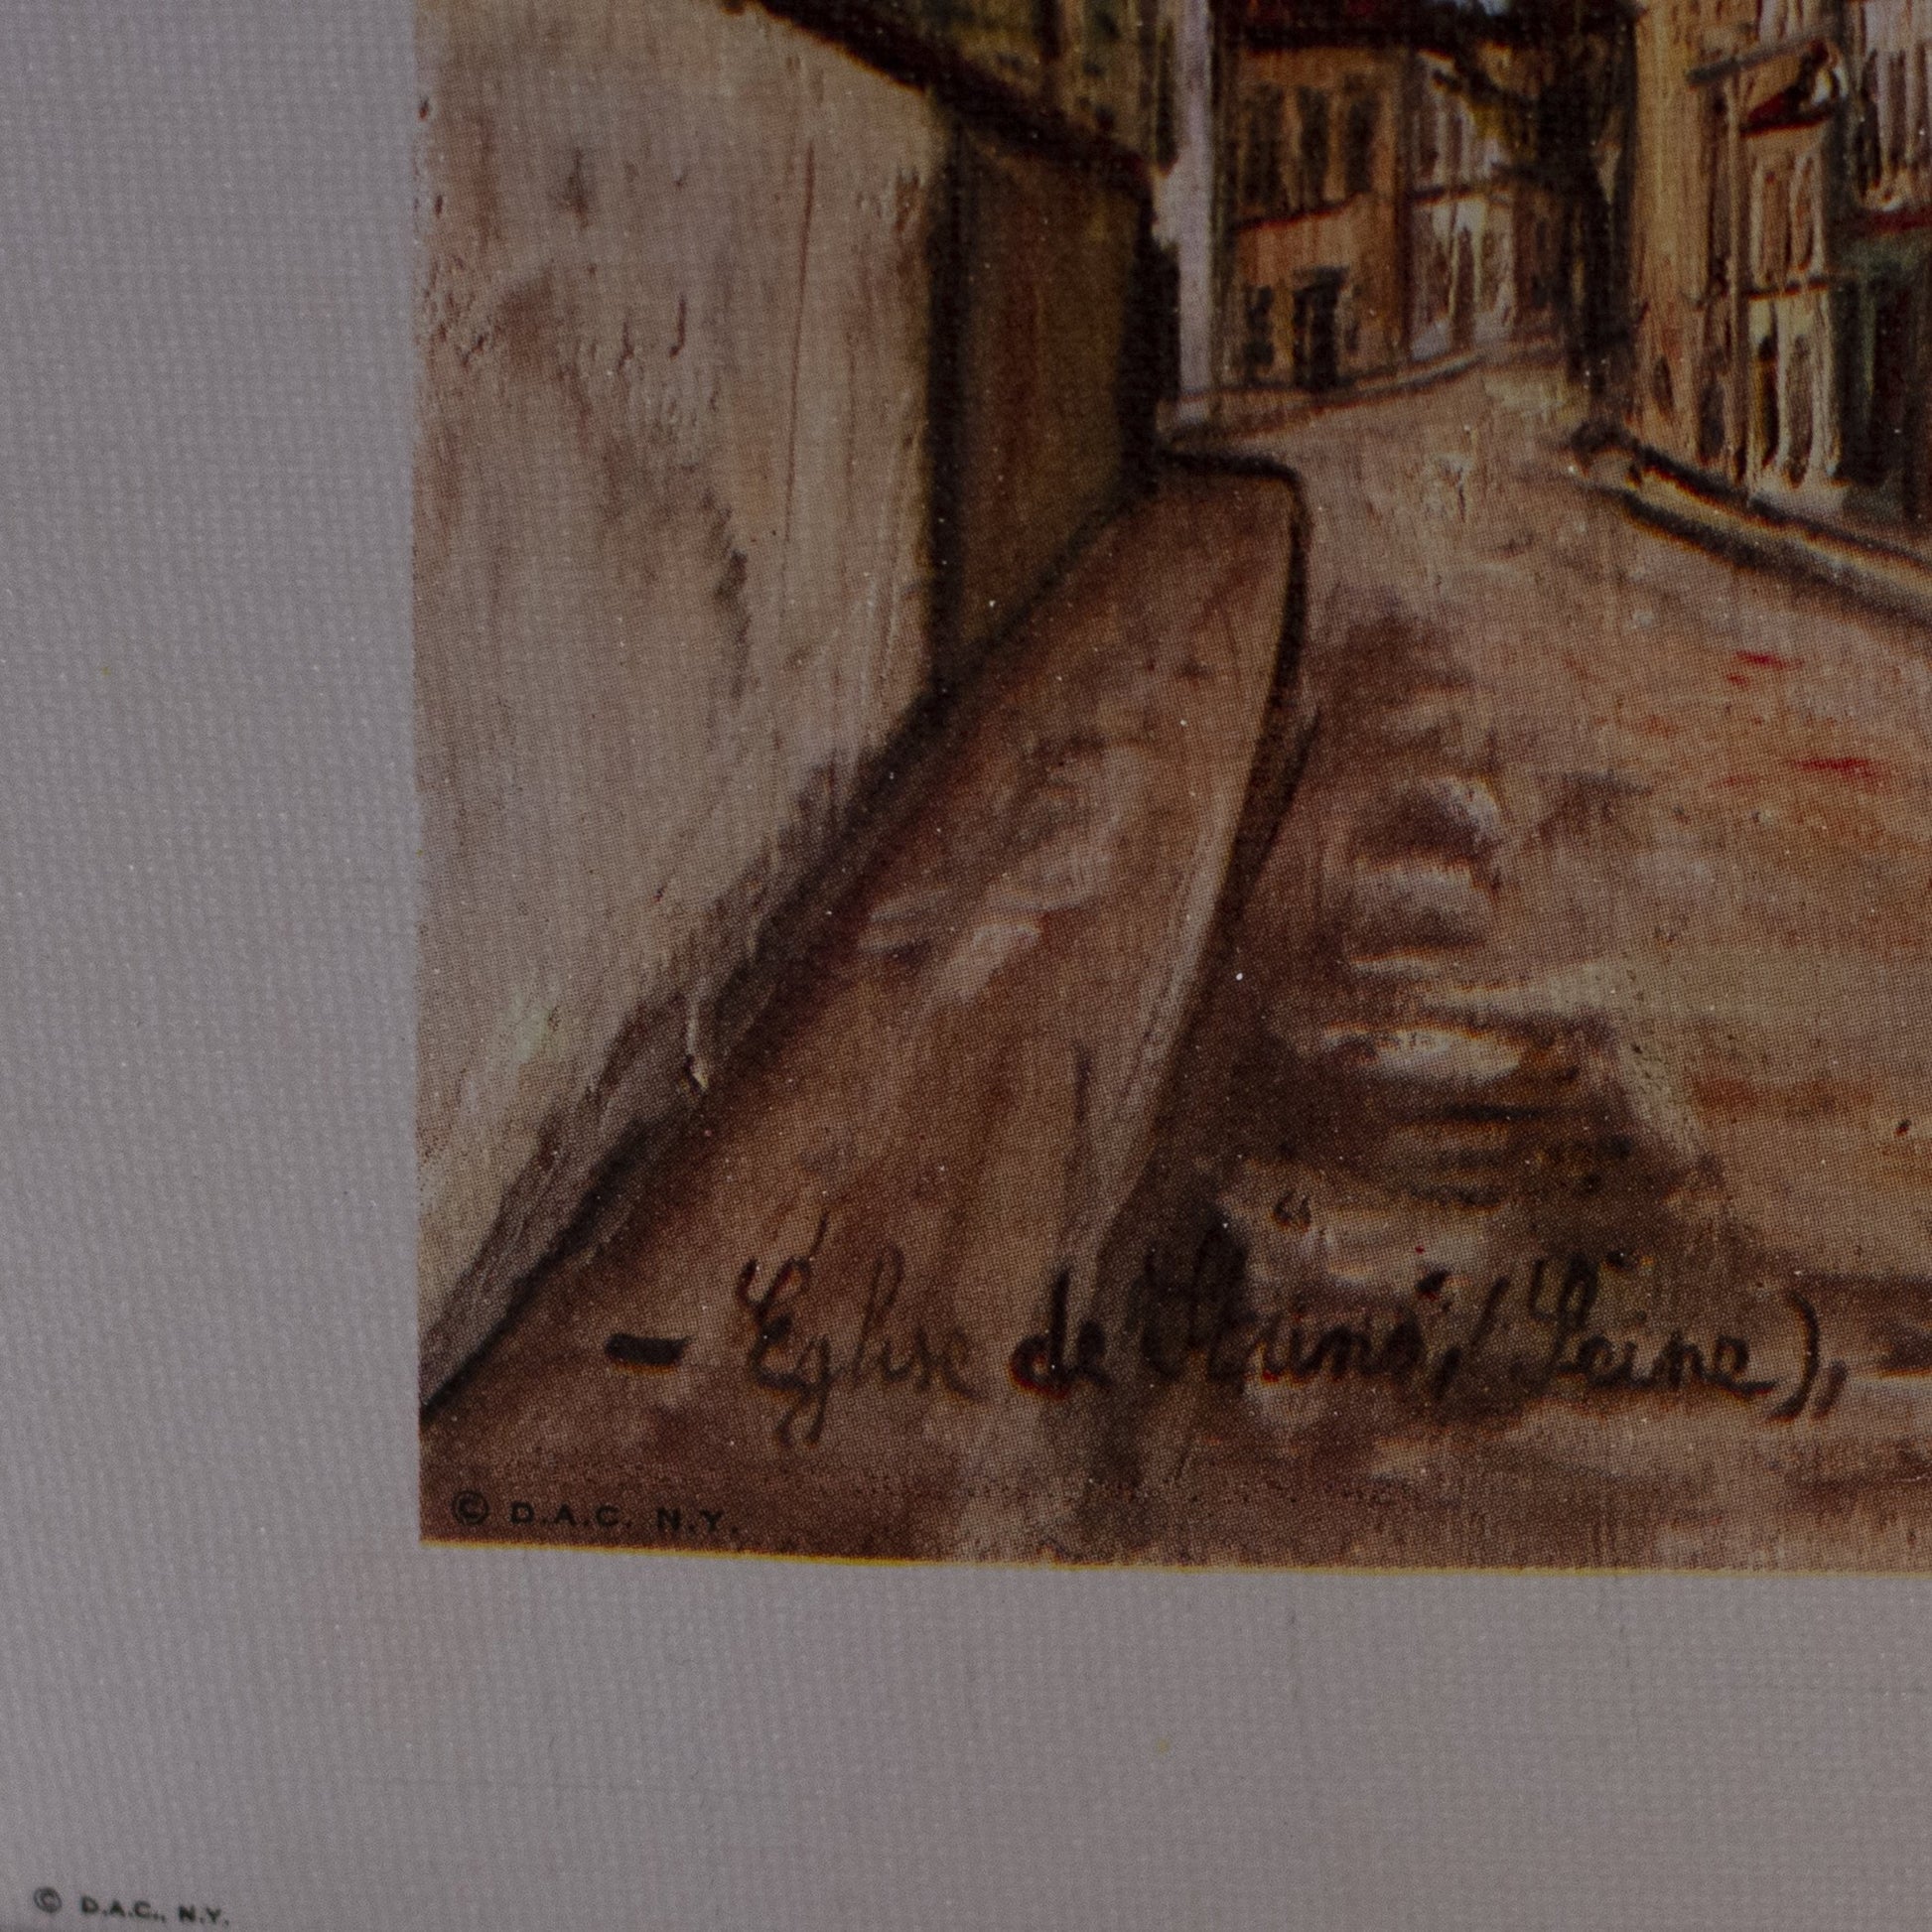 Eglise de Strins Lithograph Print on Canvas by Maurice Utrillo